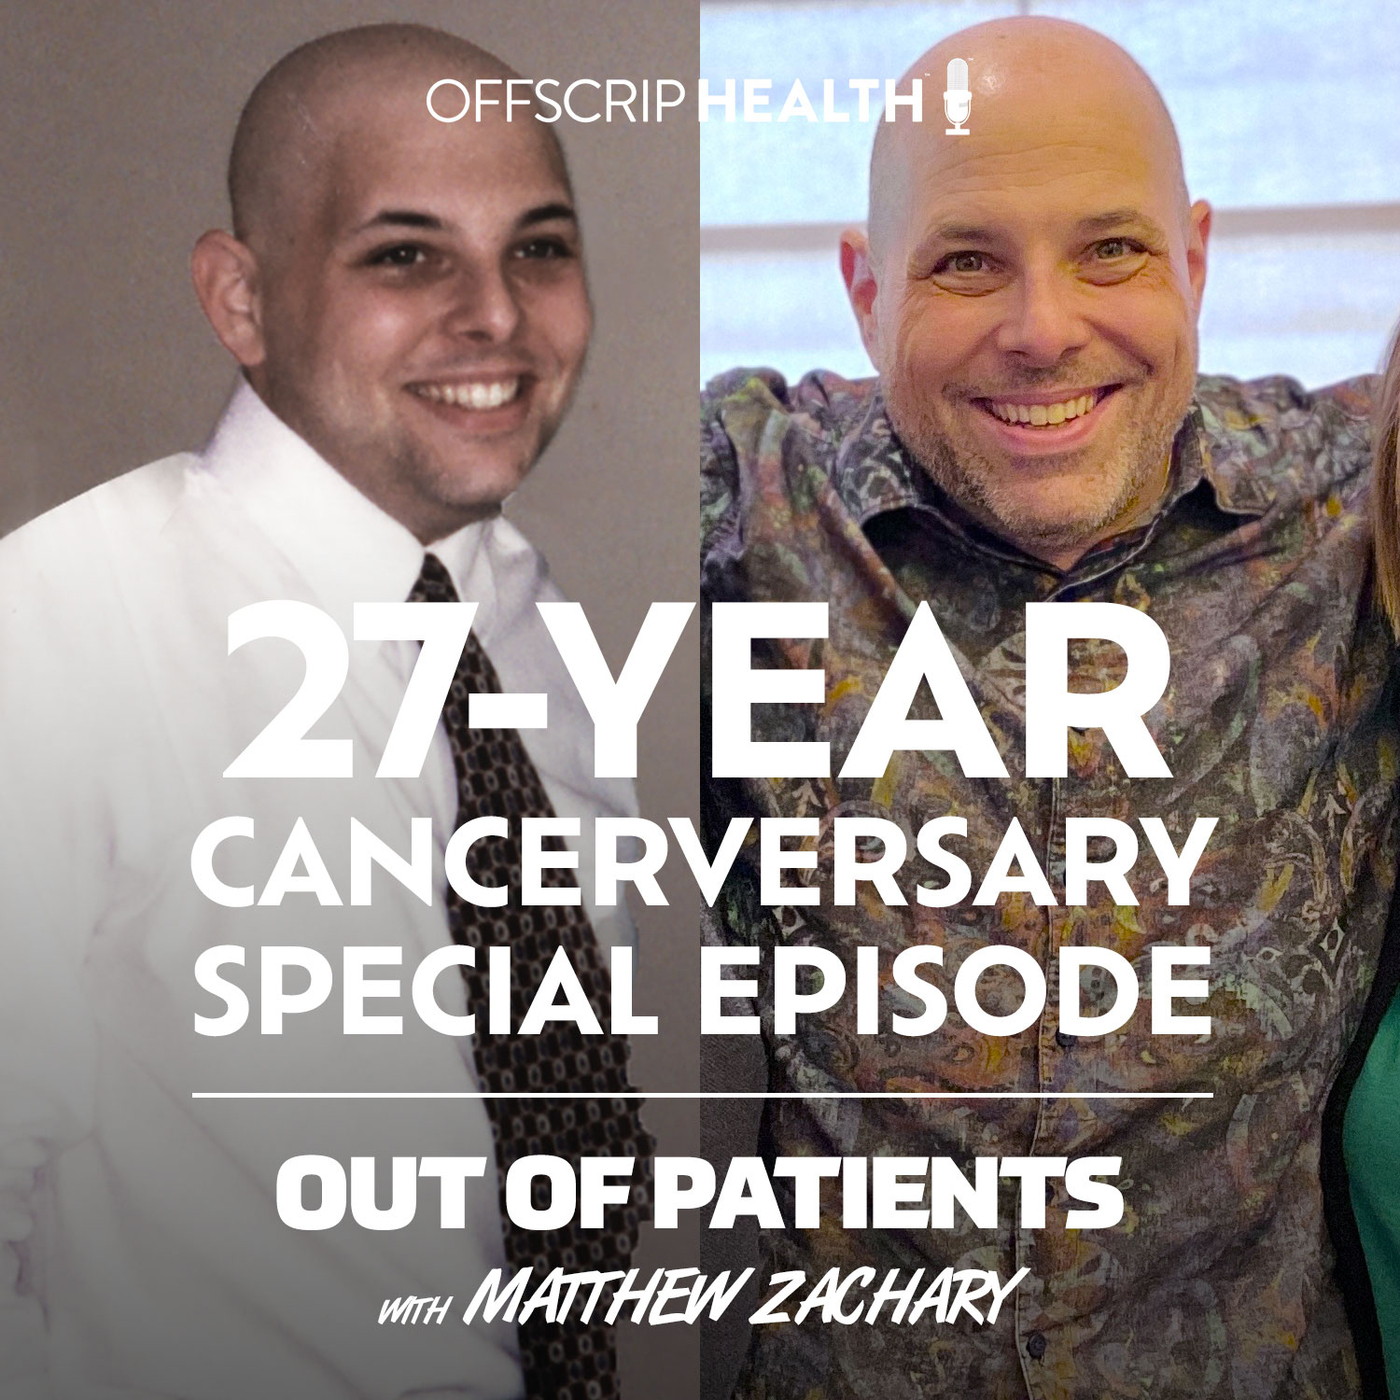 It's My 27-Year Cancerversary Episode!